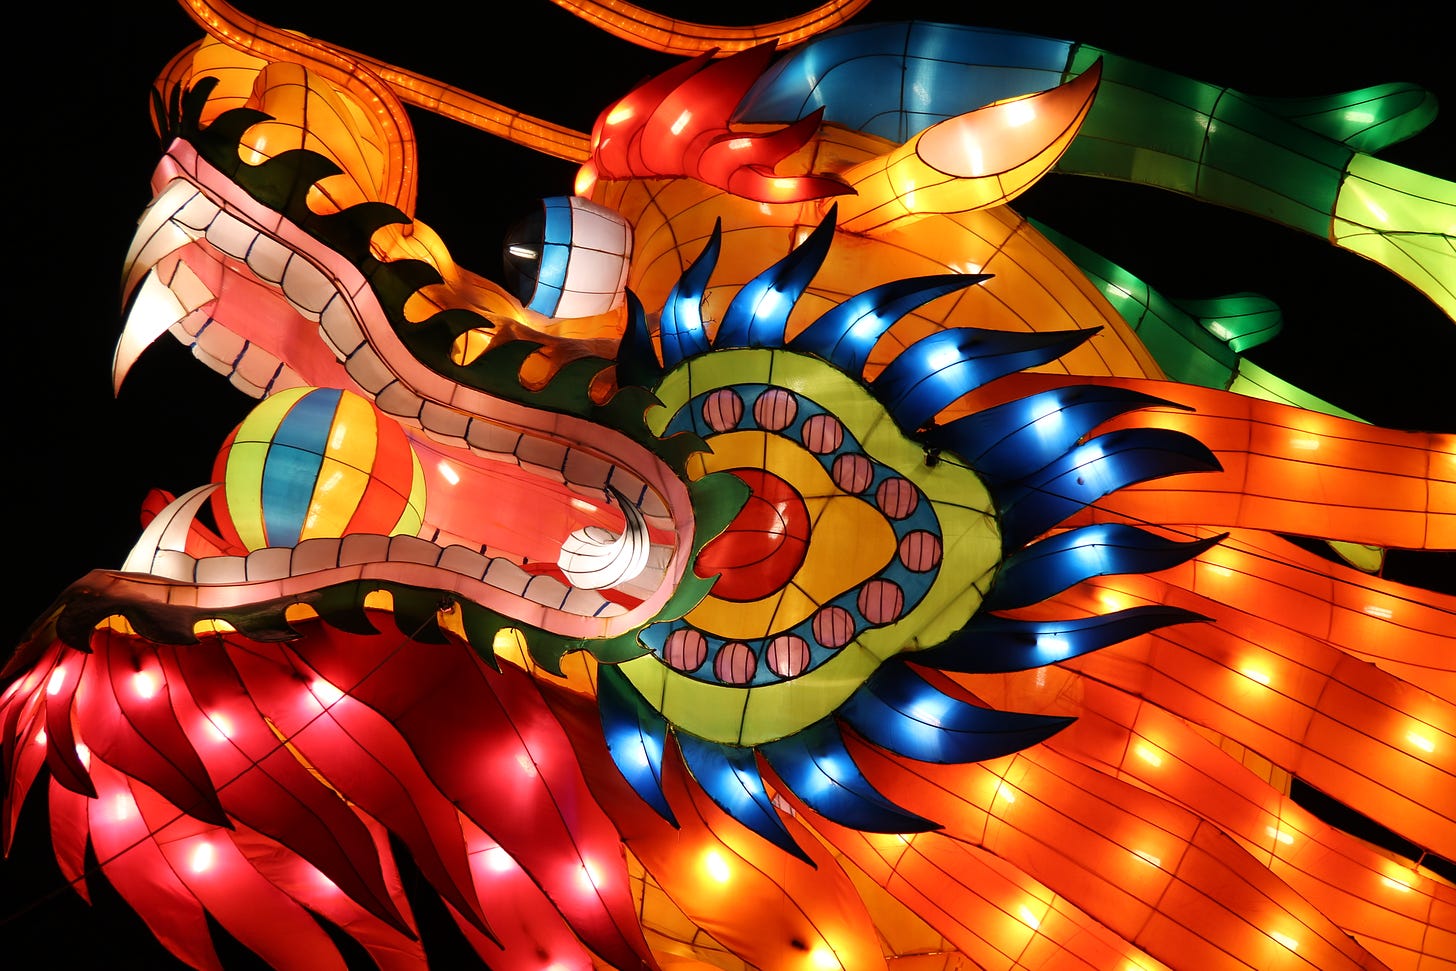 A dragon in a variety of vibrant colors as red and orange and decorated with lights against a black background.